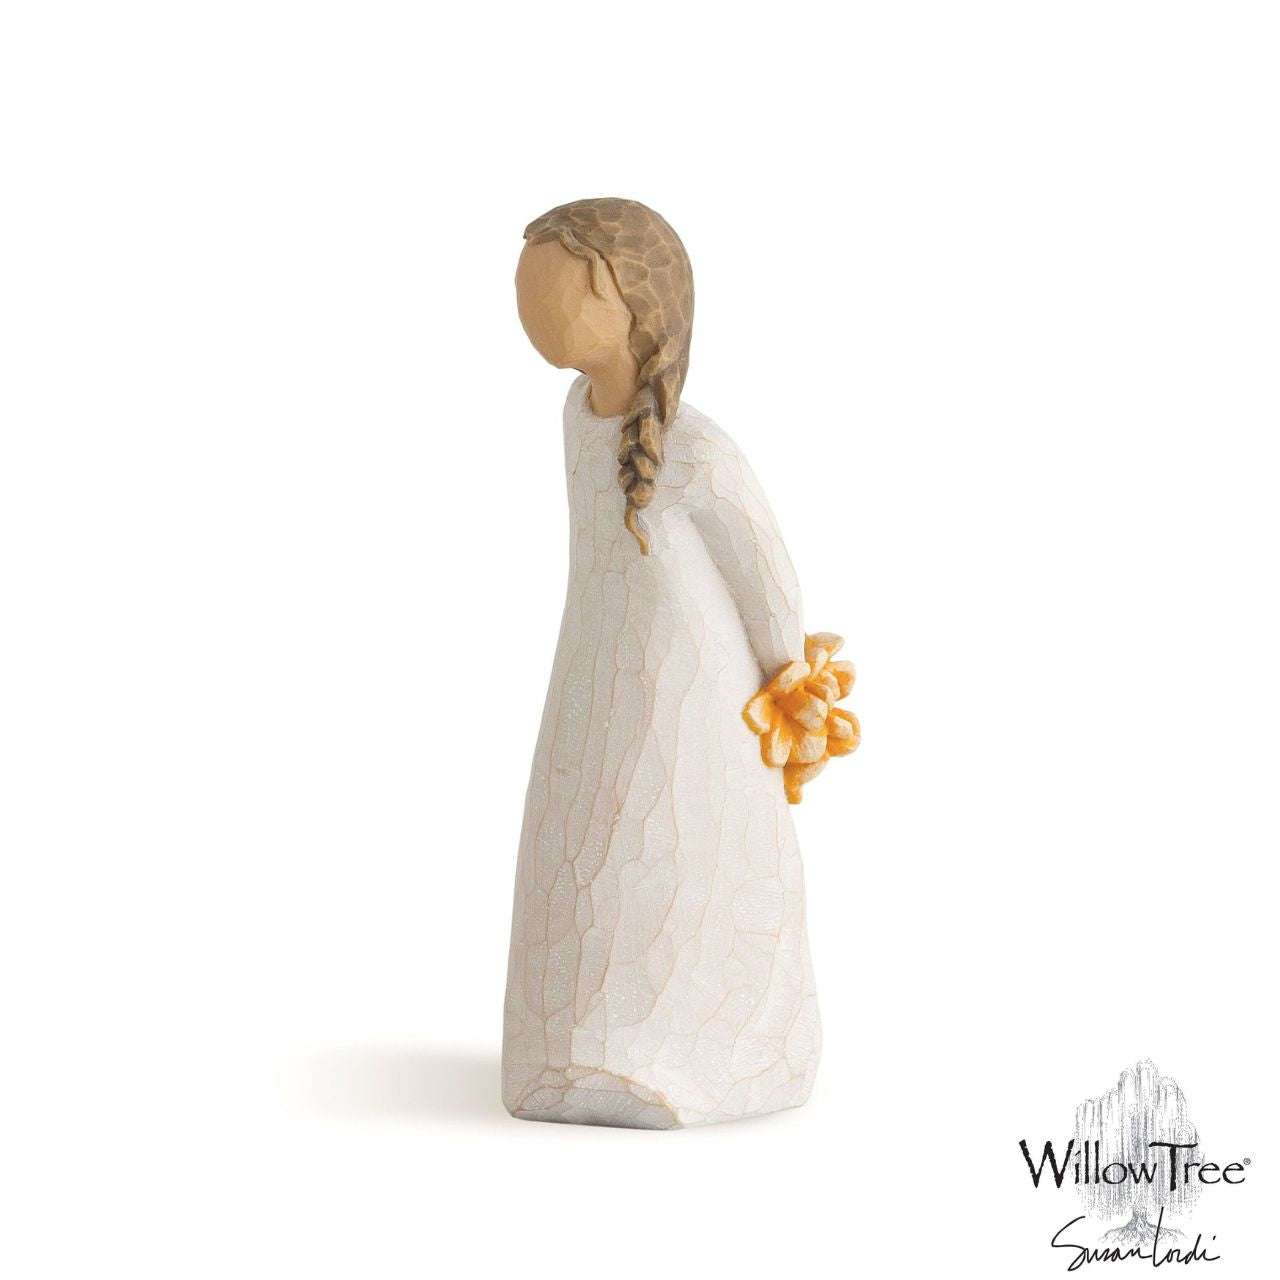 For You by Willow Tree  A gift to express appreciation and thankfulness for teachers, volunteers, donors, caregivers, friends ...or for those who love flowers. "Cheerful and sunny, wildflowers are harbingers of spring that bloom, thrive, and return year after year.